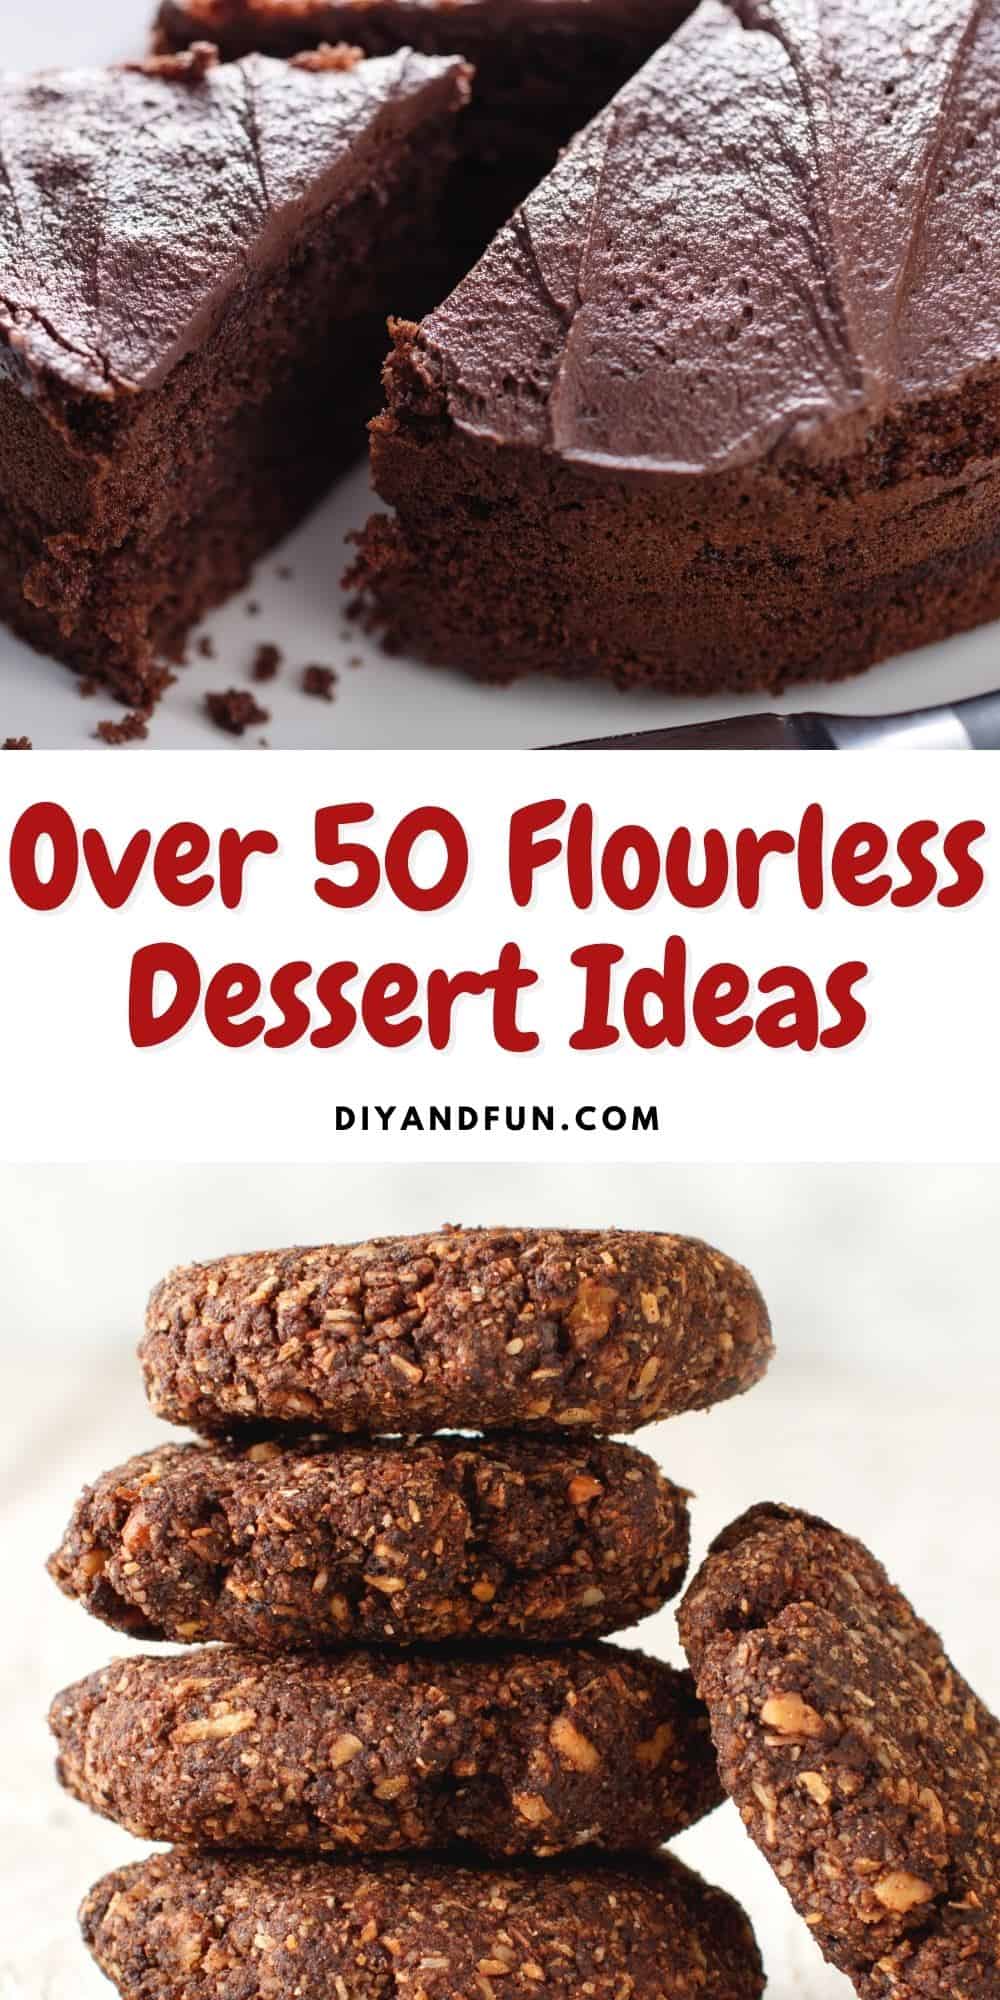 Over 50 Flourless Dessert Ideas, includes delicious cakes, cookies, bars, sugar free, gluten free, and vegan recipes